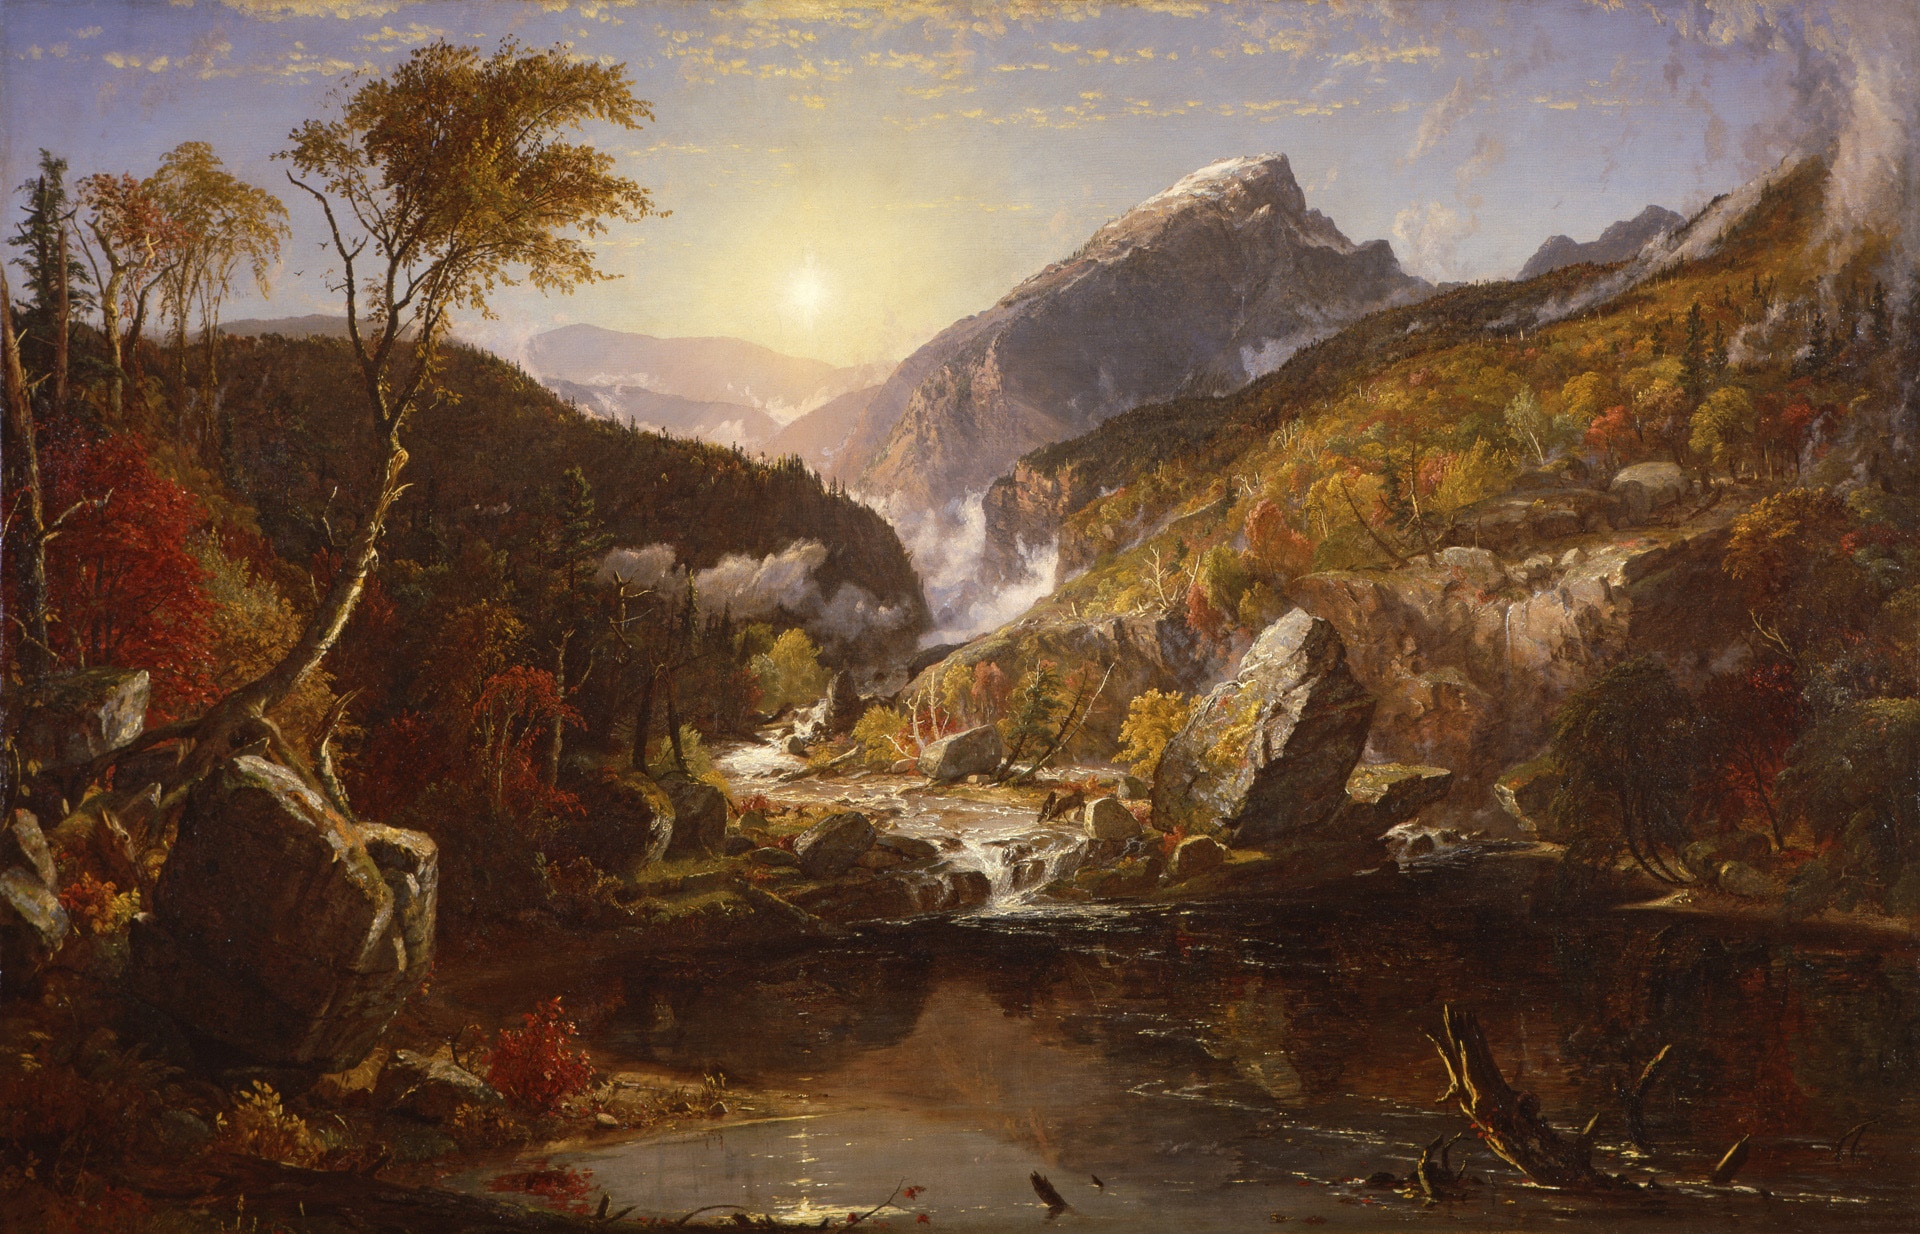 a landscape of mountains, trees, and a lake with strong sunlight